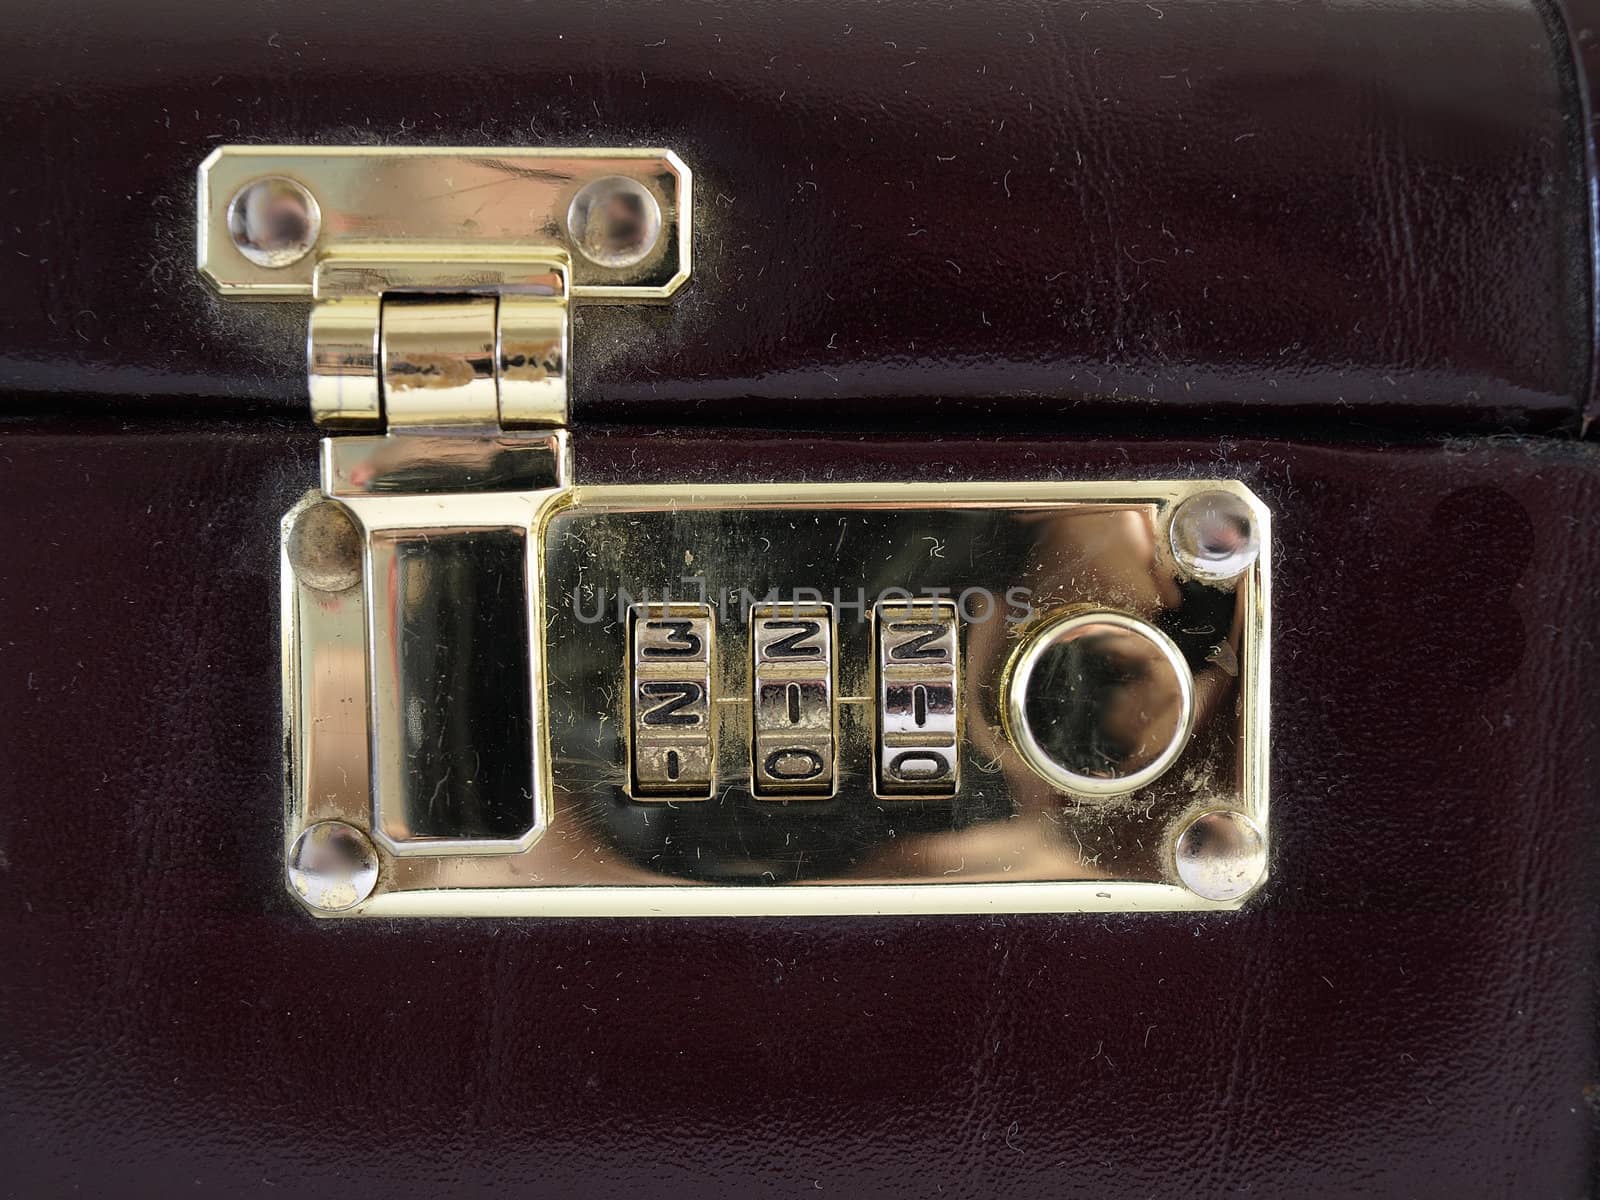 Isolated view of a combination lock in a closed and locked position